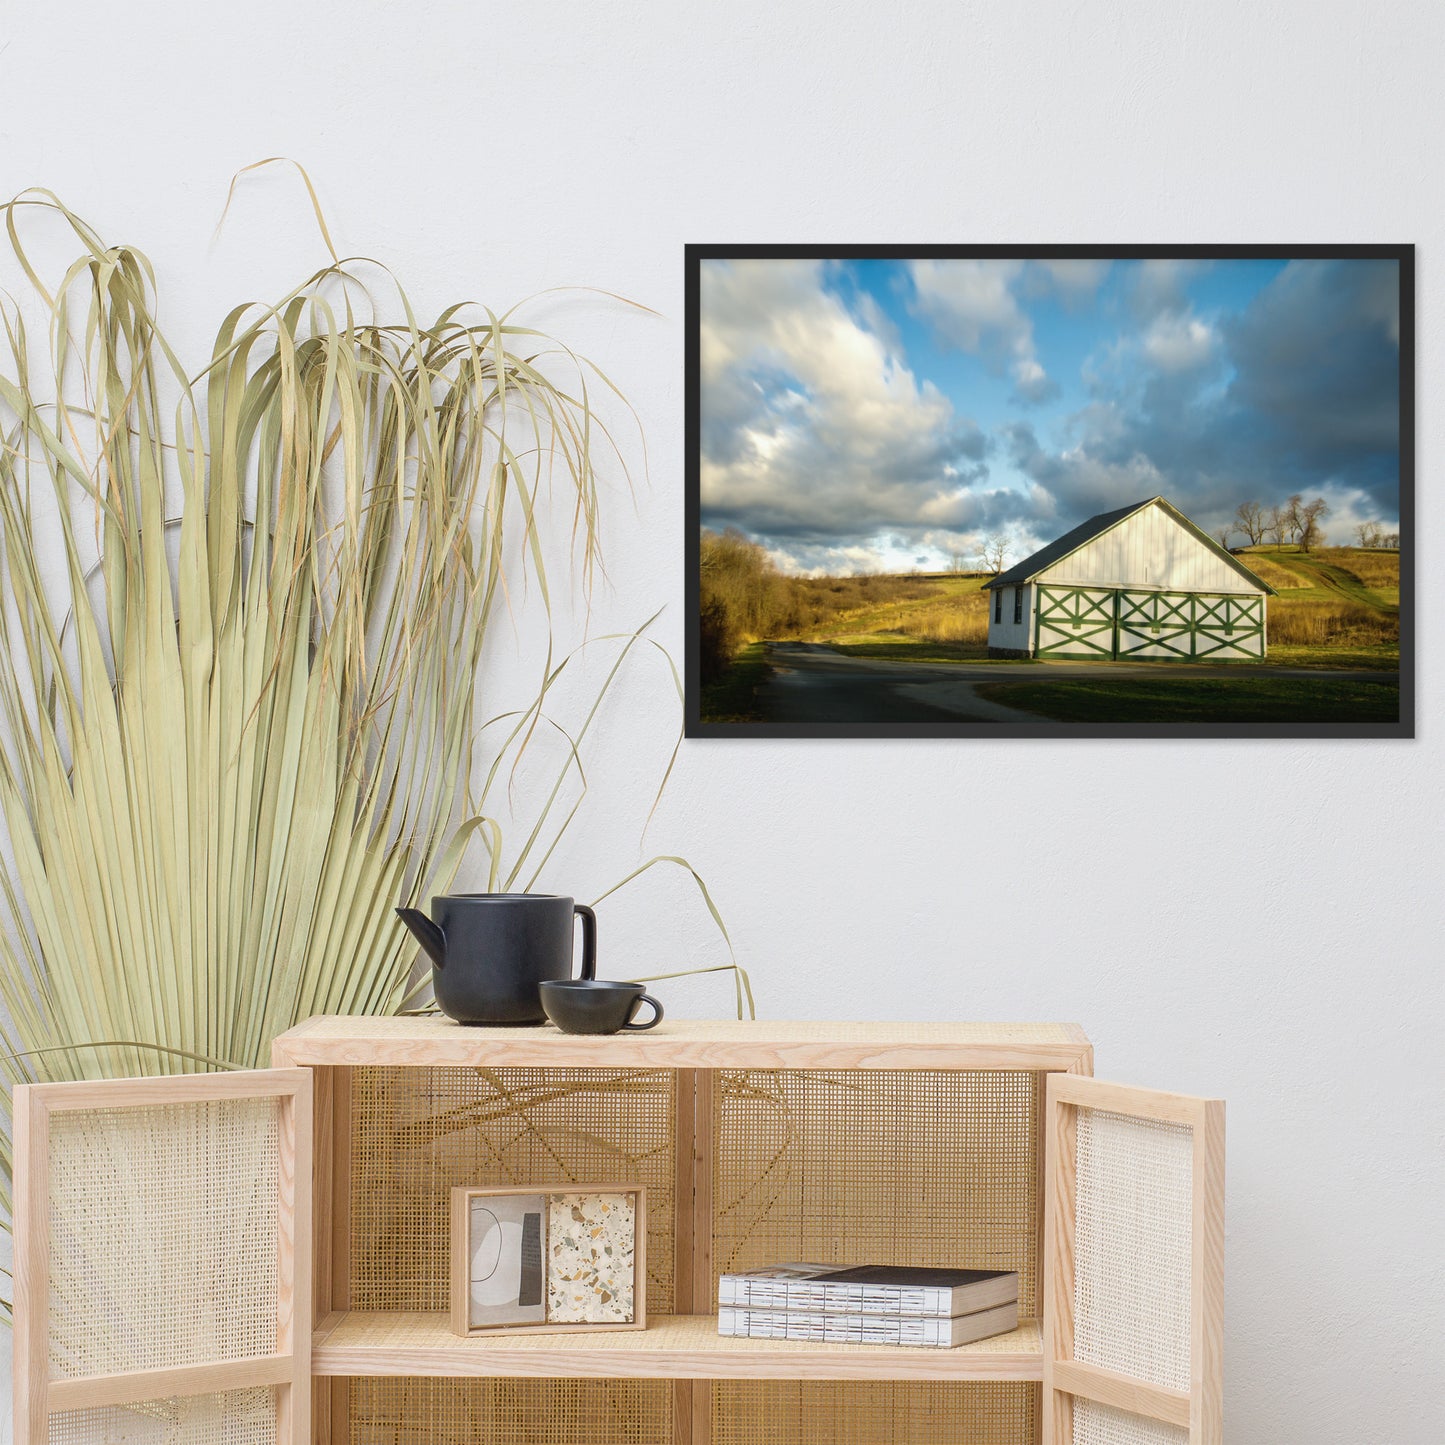 Neutral Wall Art For Bedroom: Aging Barn in the Morning Sun - Rural / Country Style Landscape / Nature Photograph  Framed Wall Art Print - Wall Decor - Artwork